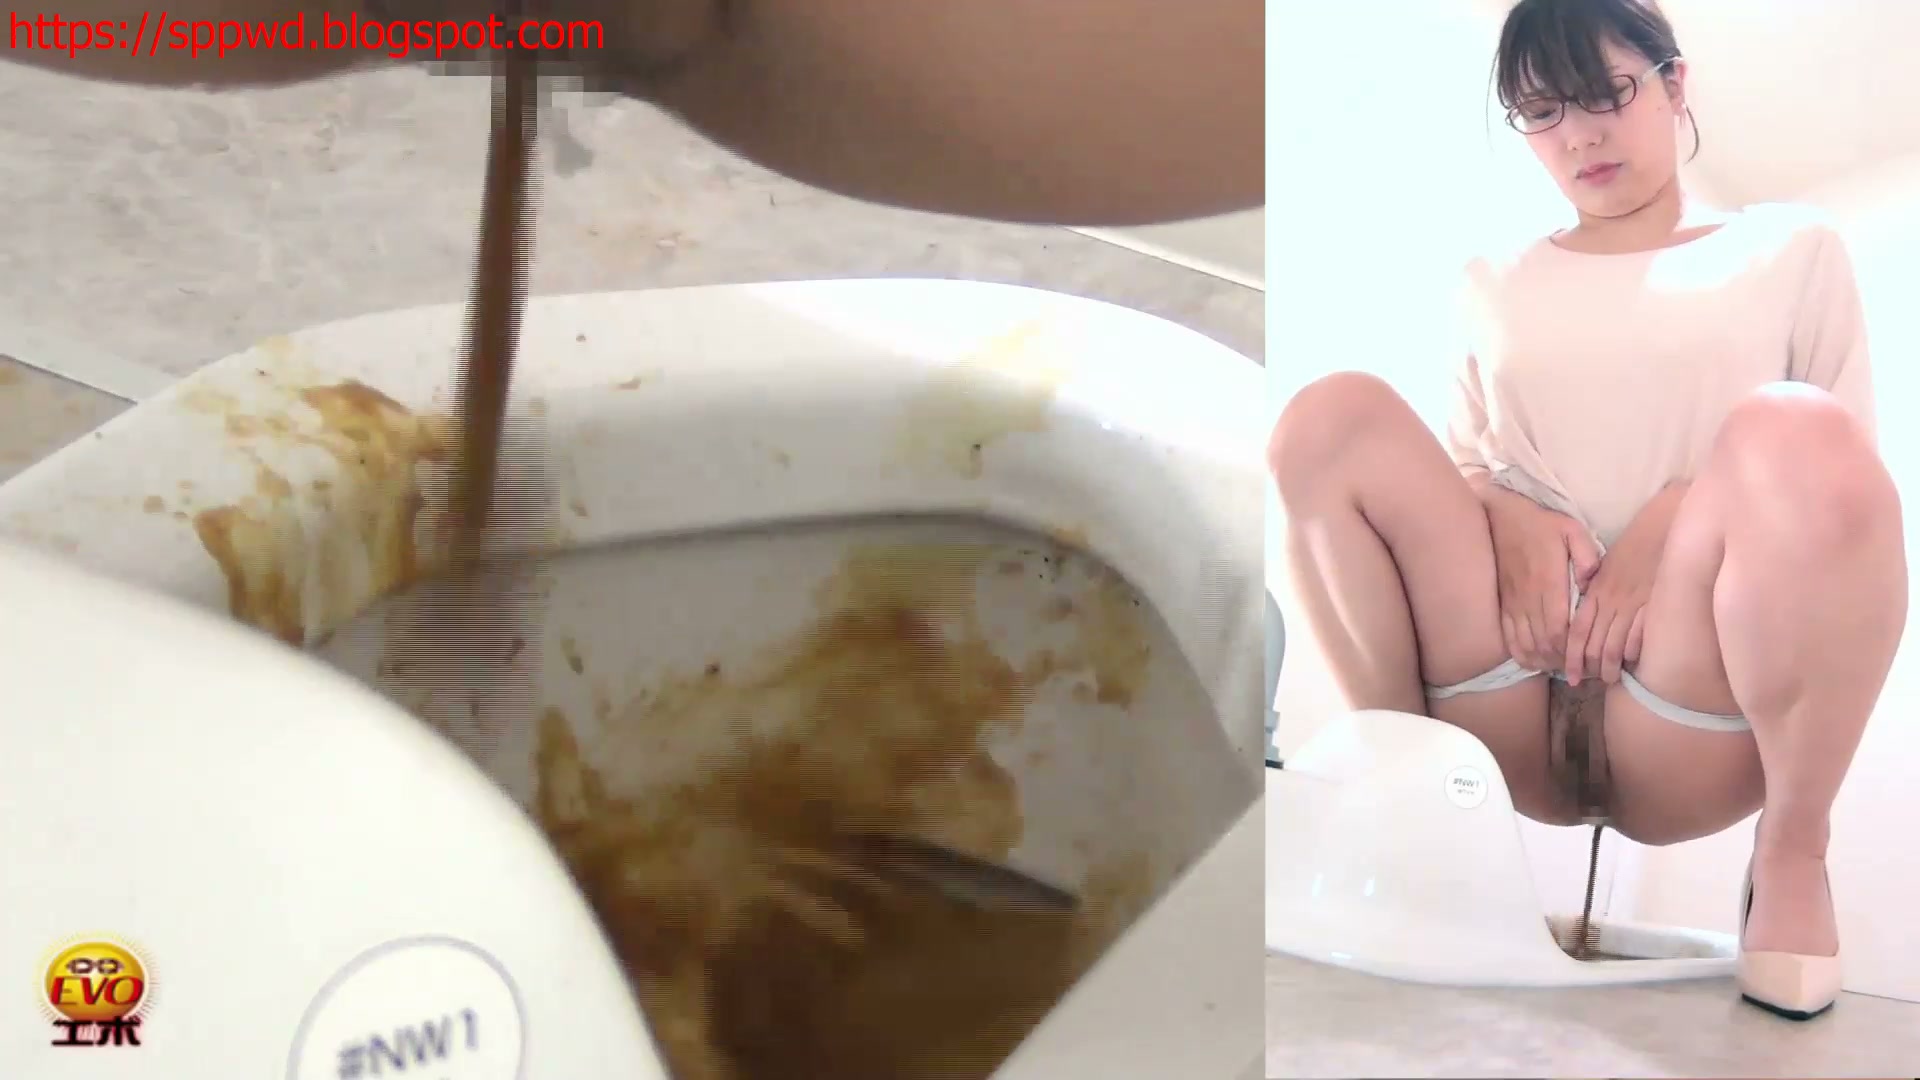 Cute glasses lady had a messy diarrhea EE180 pic